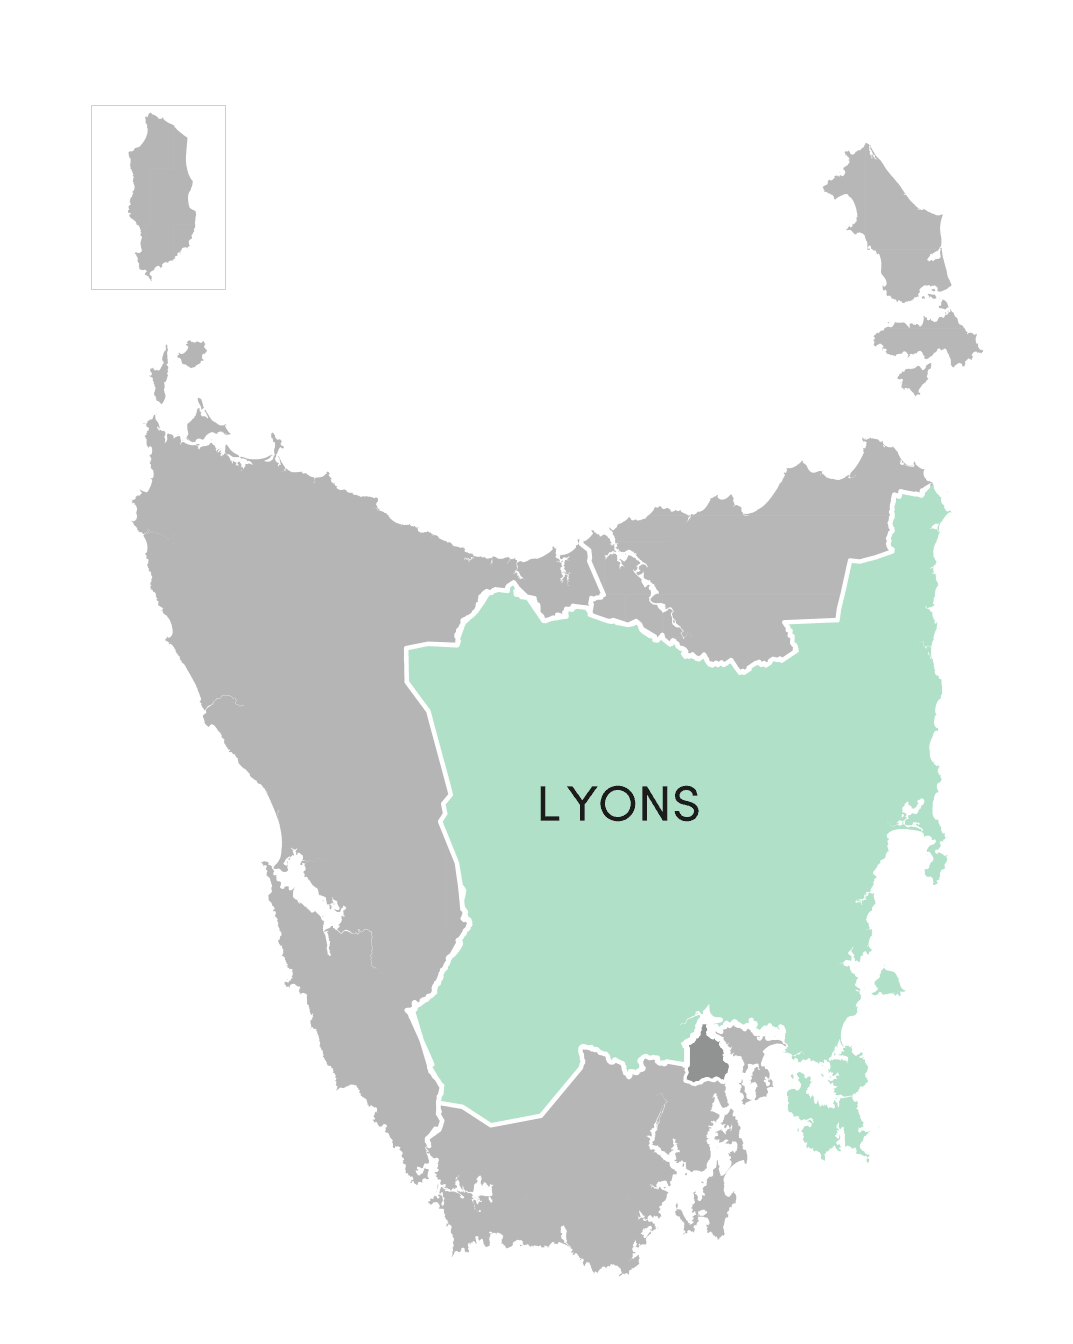 Lyons division highlighted on illustrated map of Tasmania